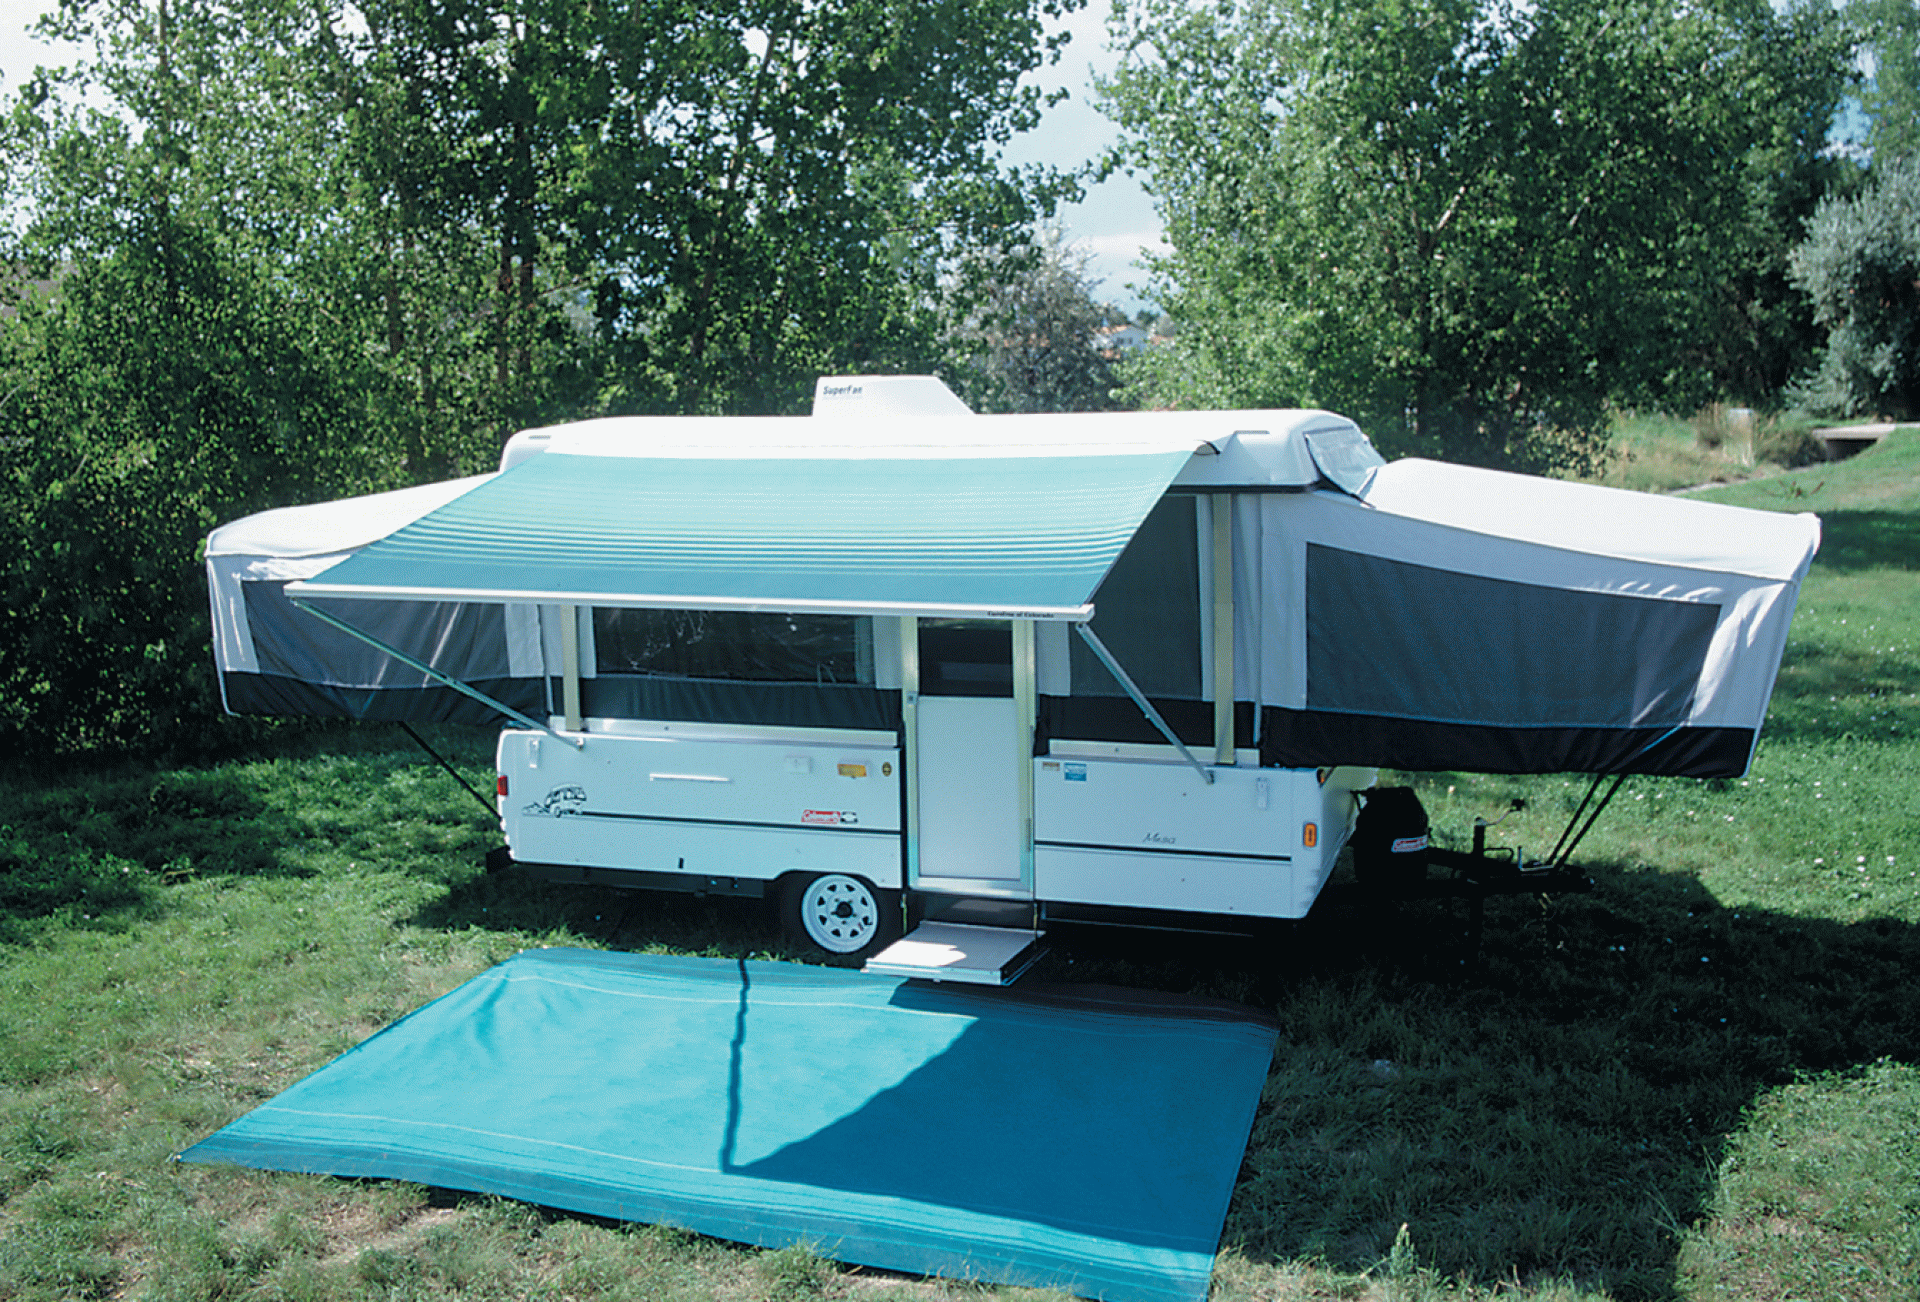 CAREFREE OF COLORADO | 981577900 | Campout Awning 4.0 Metric 13' 1" Ocean Blue With White Bag